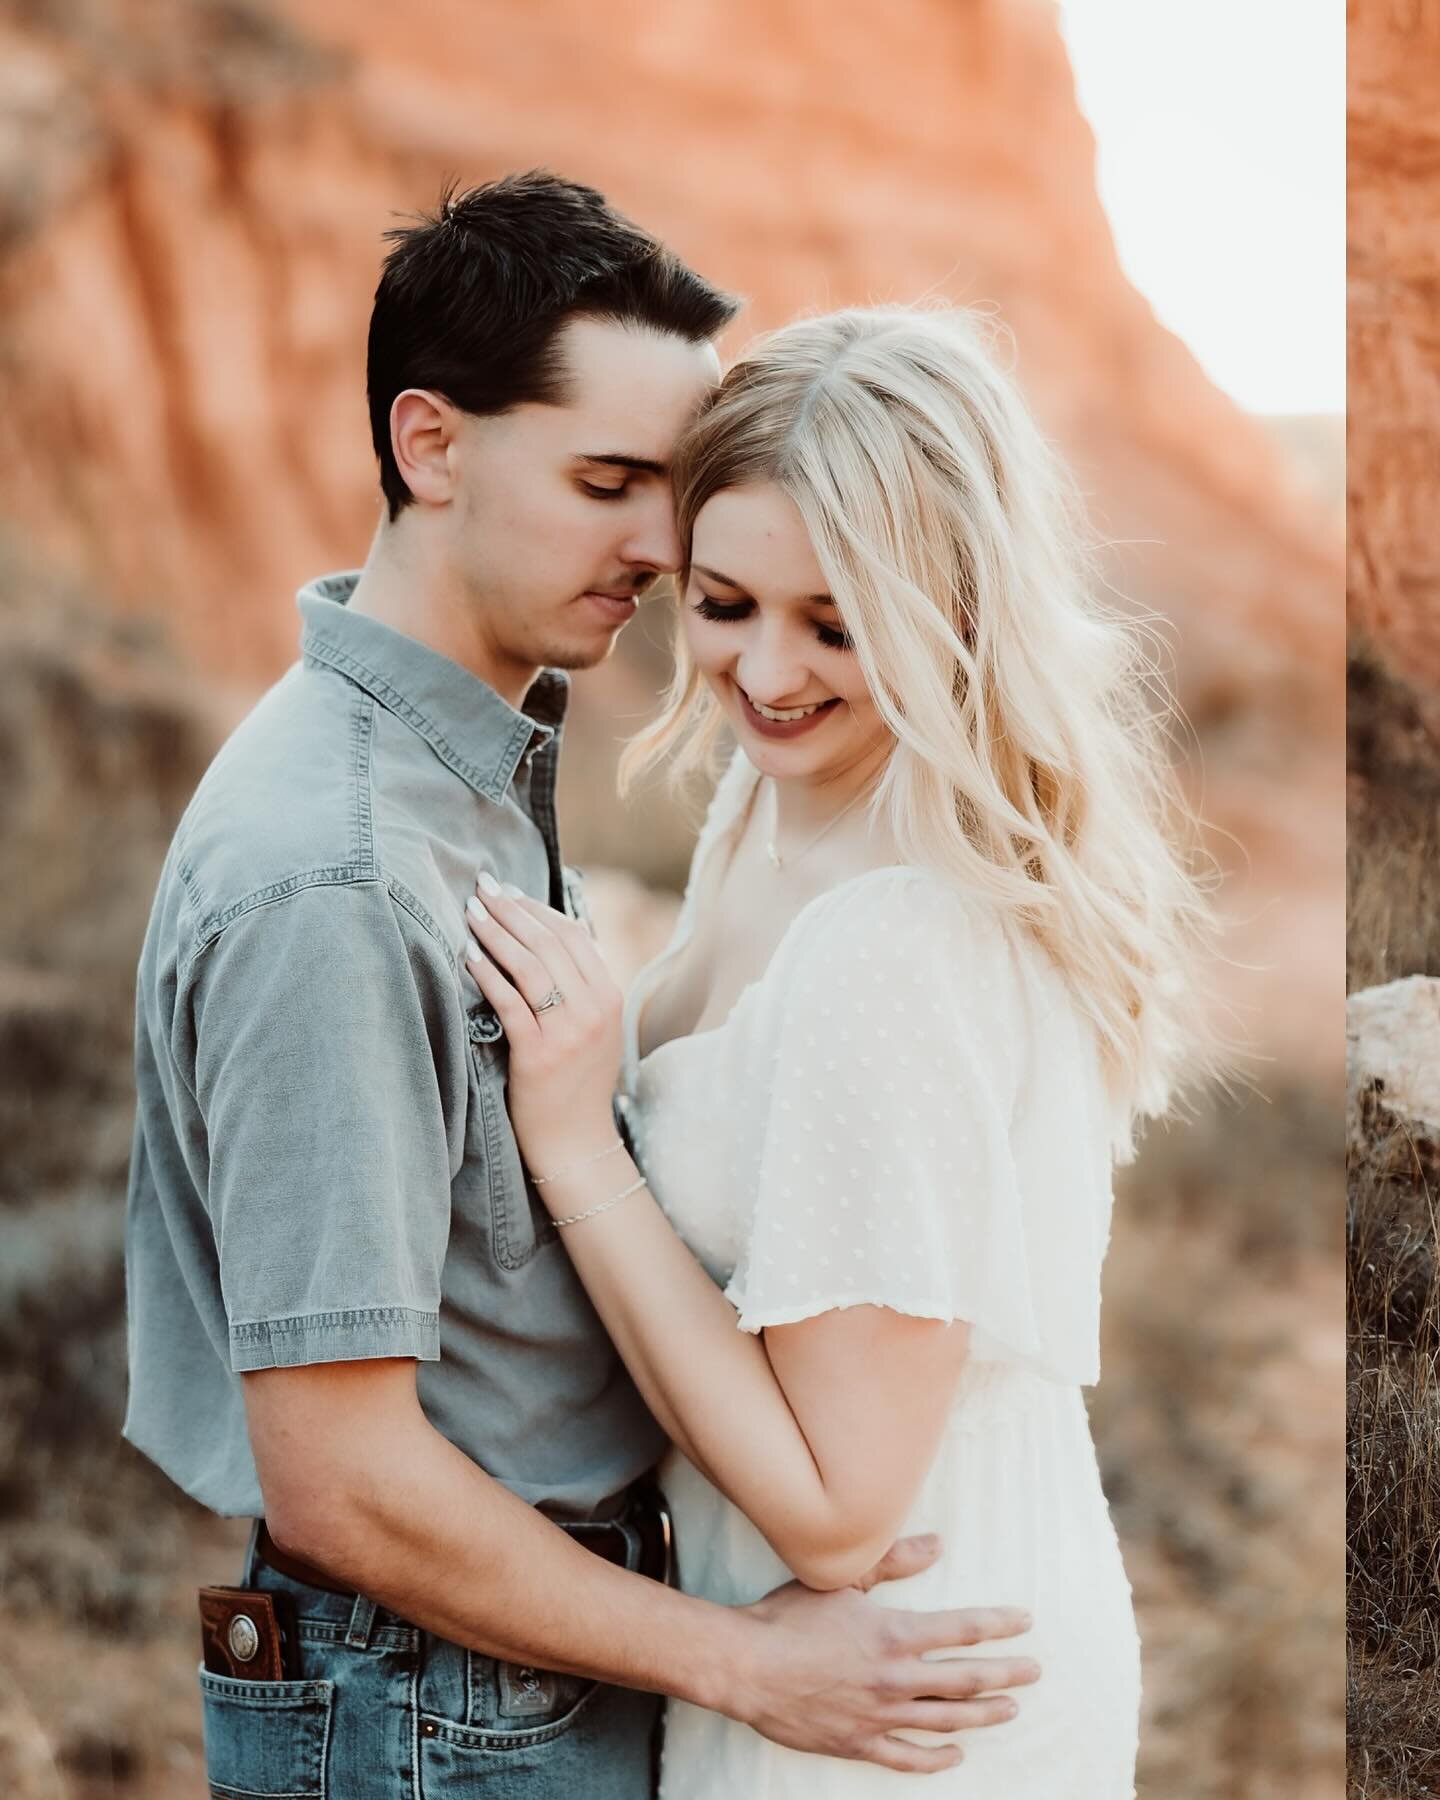 Our weather has been nuts lately!! Luckily Kaitlyn and Josh&rsquo;s engagement shoot landed on a rare perfect day!! They are such a fun couple, can&rsquo;t wait for their wedding day!💕